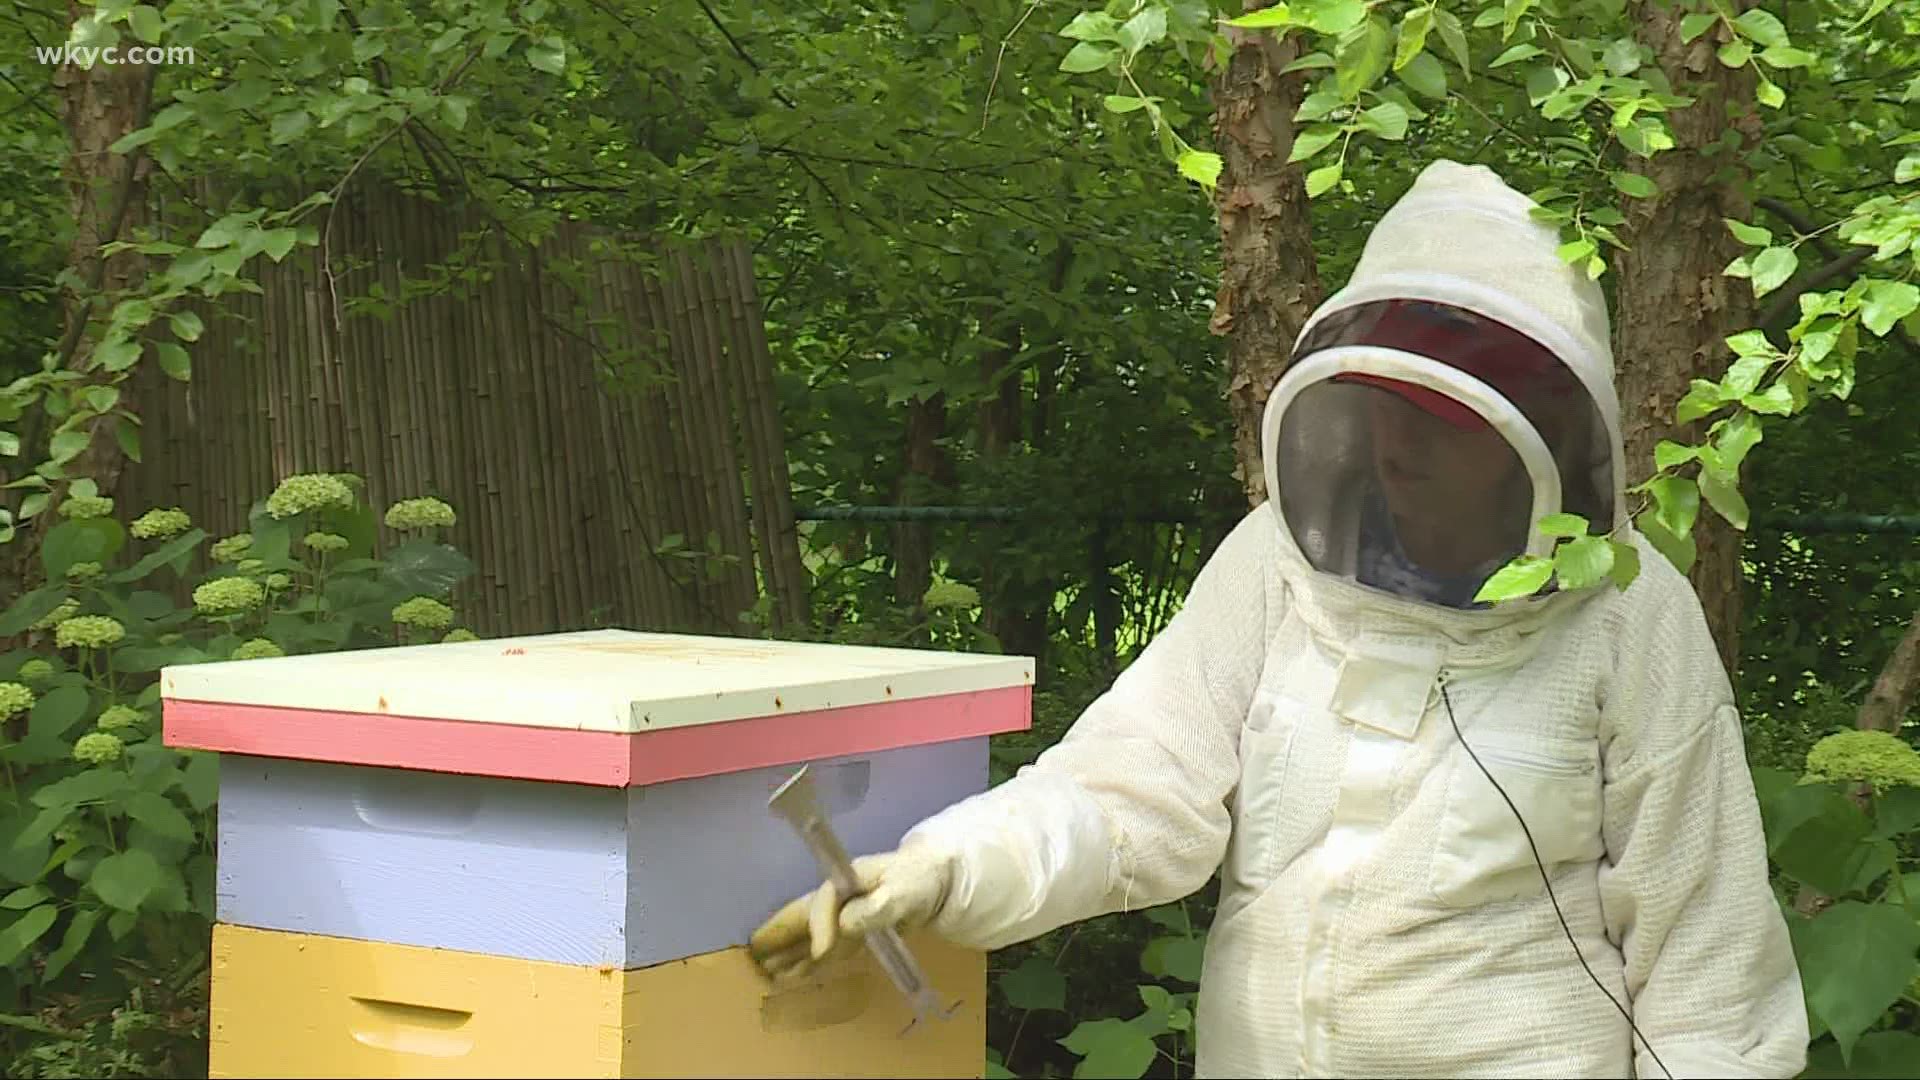 There is a craze, or a buzz you might say, over an increasingly more popular hobby- beekeeping! Doug Trattner shows us more about the bee business.